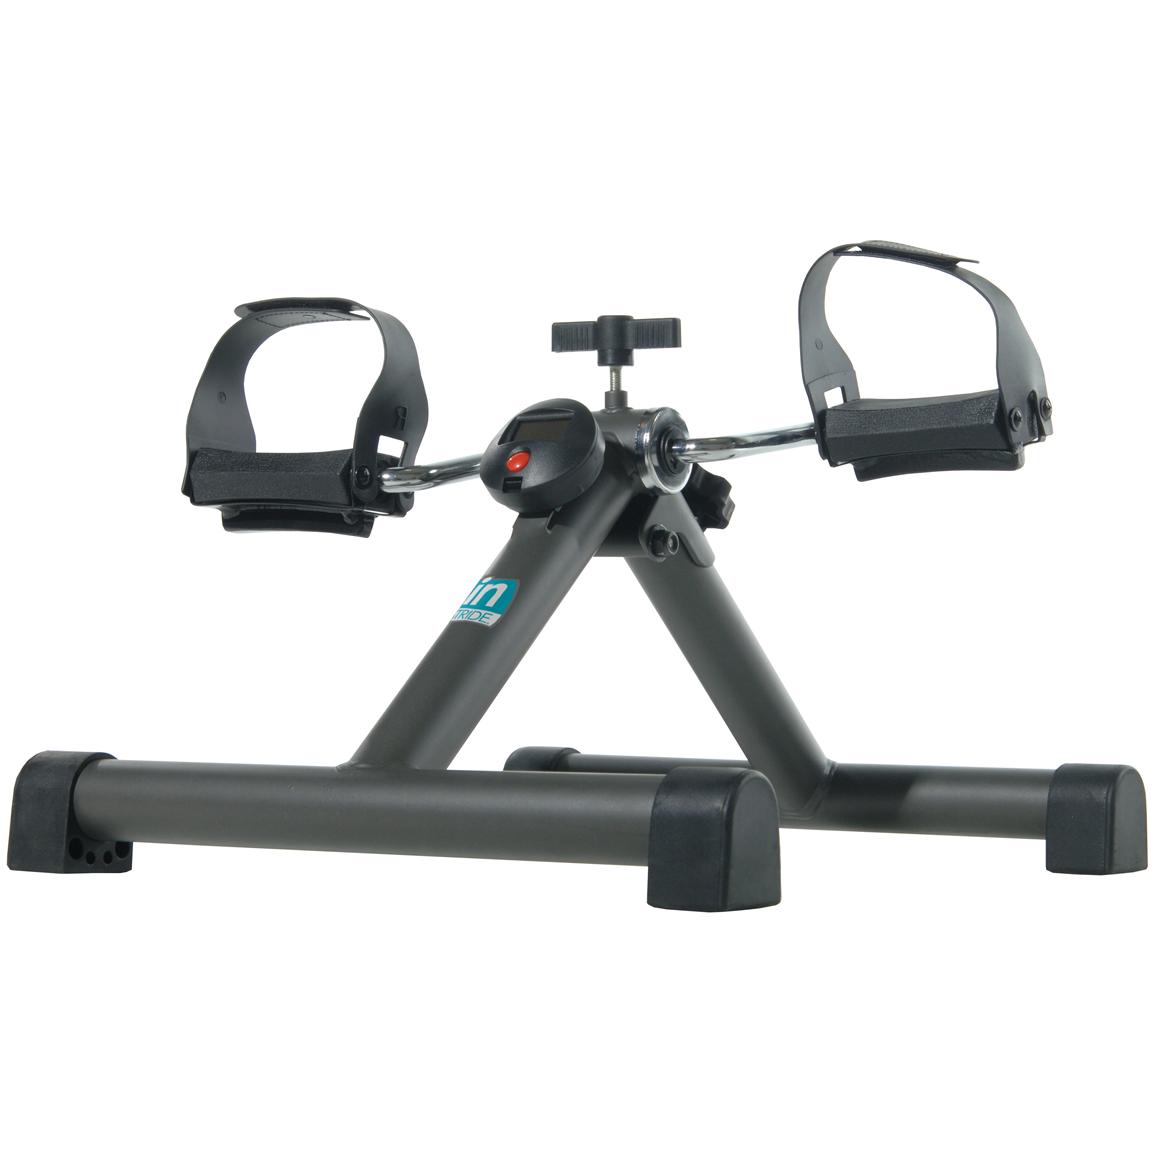 Stamina® InStride® Folding Cycle - 300946, at Sportsman's Guide